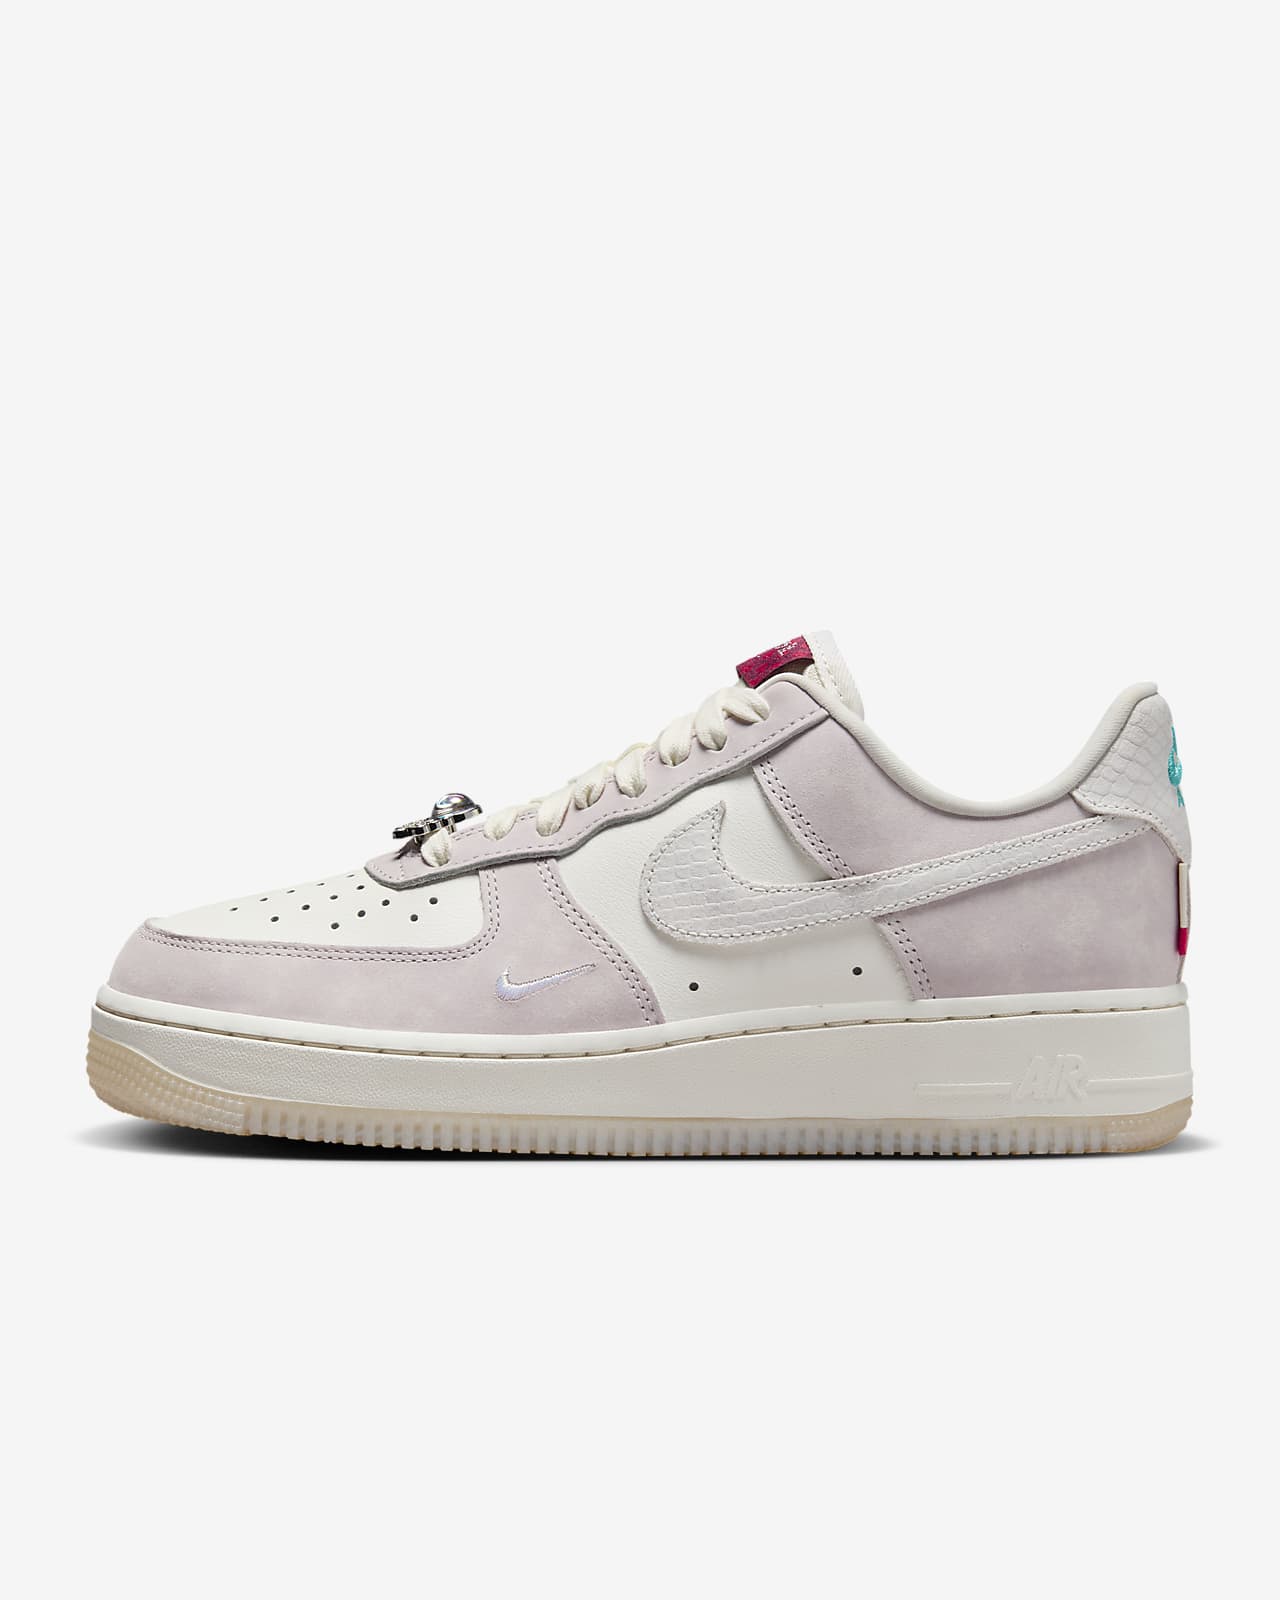 Chaussure Nike Air Force 1 '07 LX pour femme